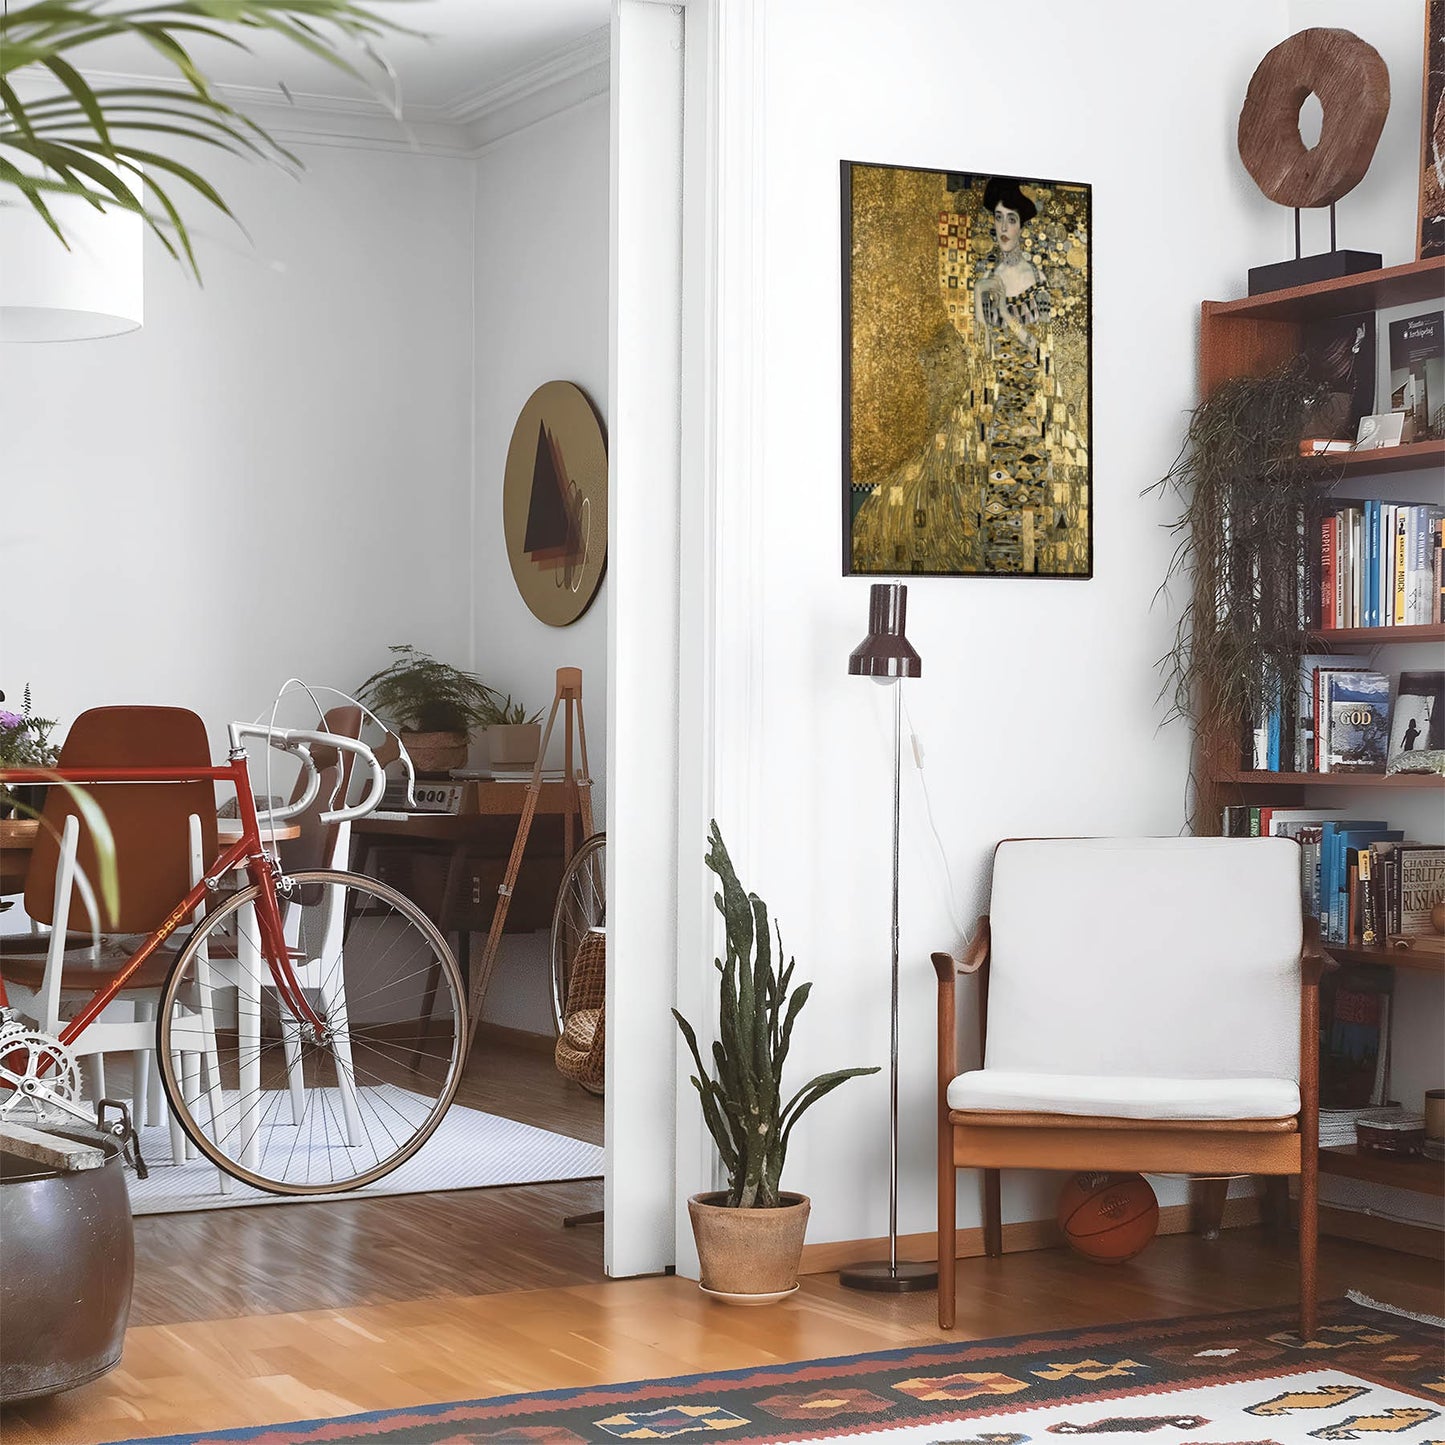 Eclectic living room with a road bike, bookshelf and house plants that features framed artwork of a Art Nouveau Symbolic above a chair and lamp